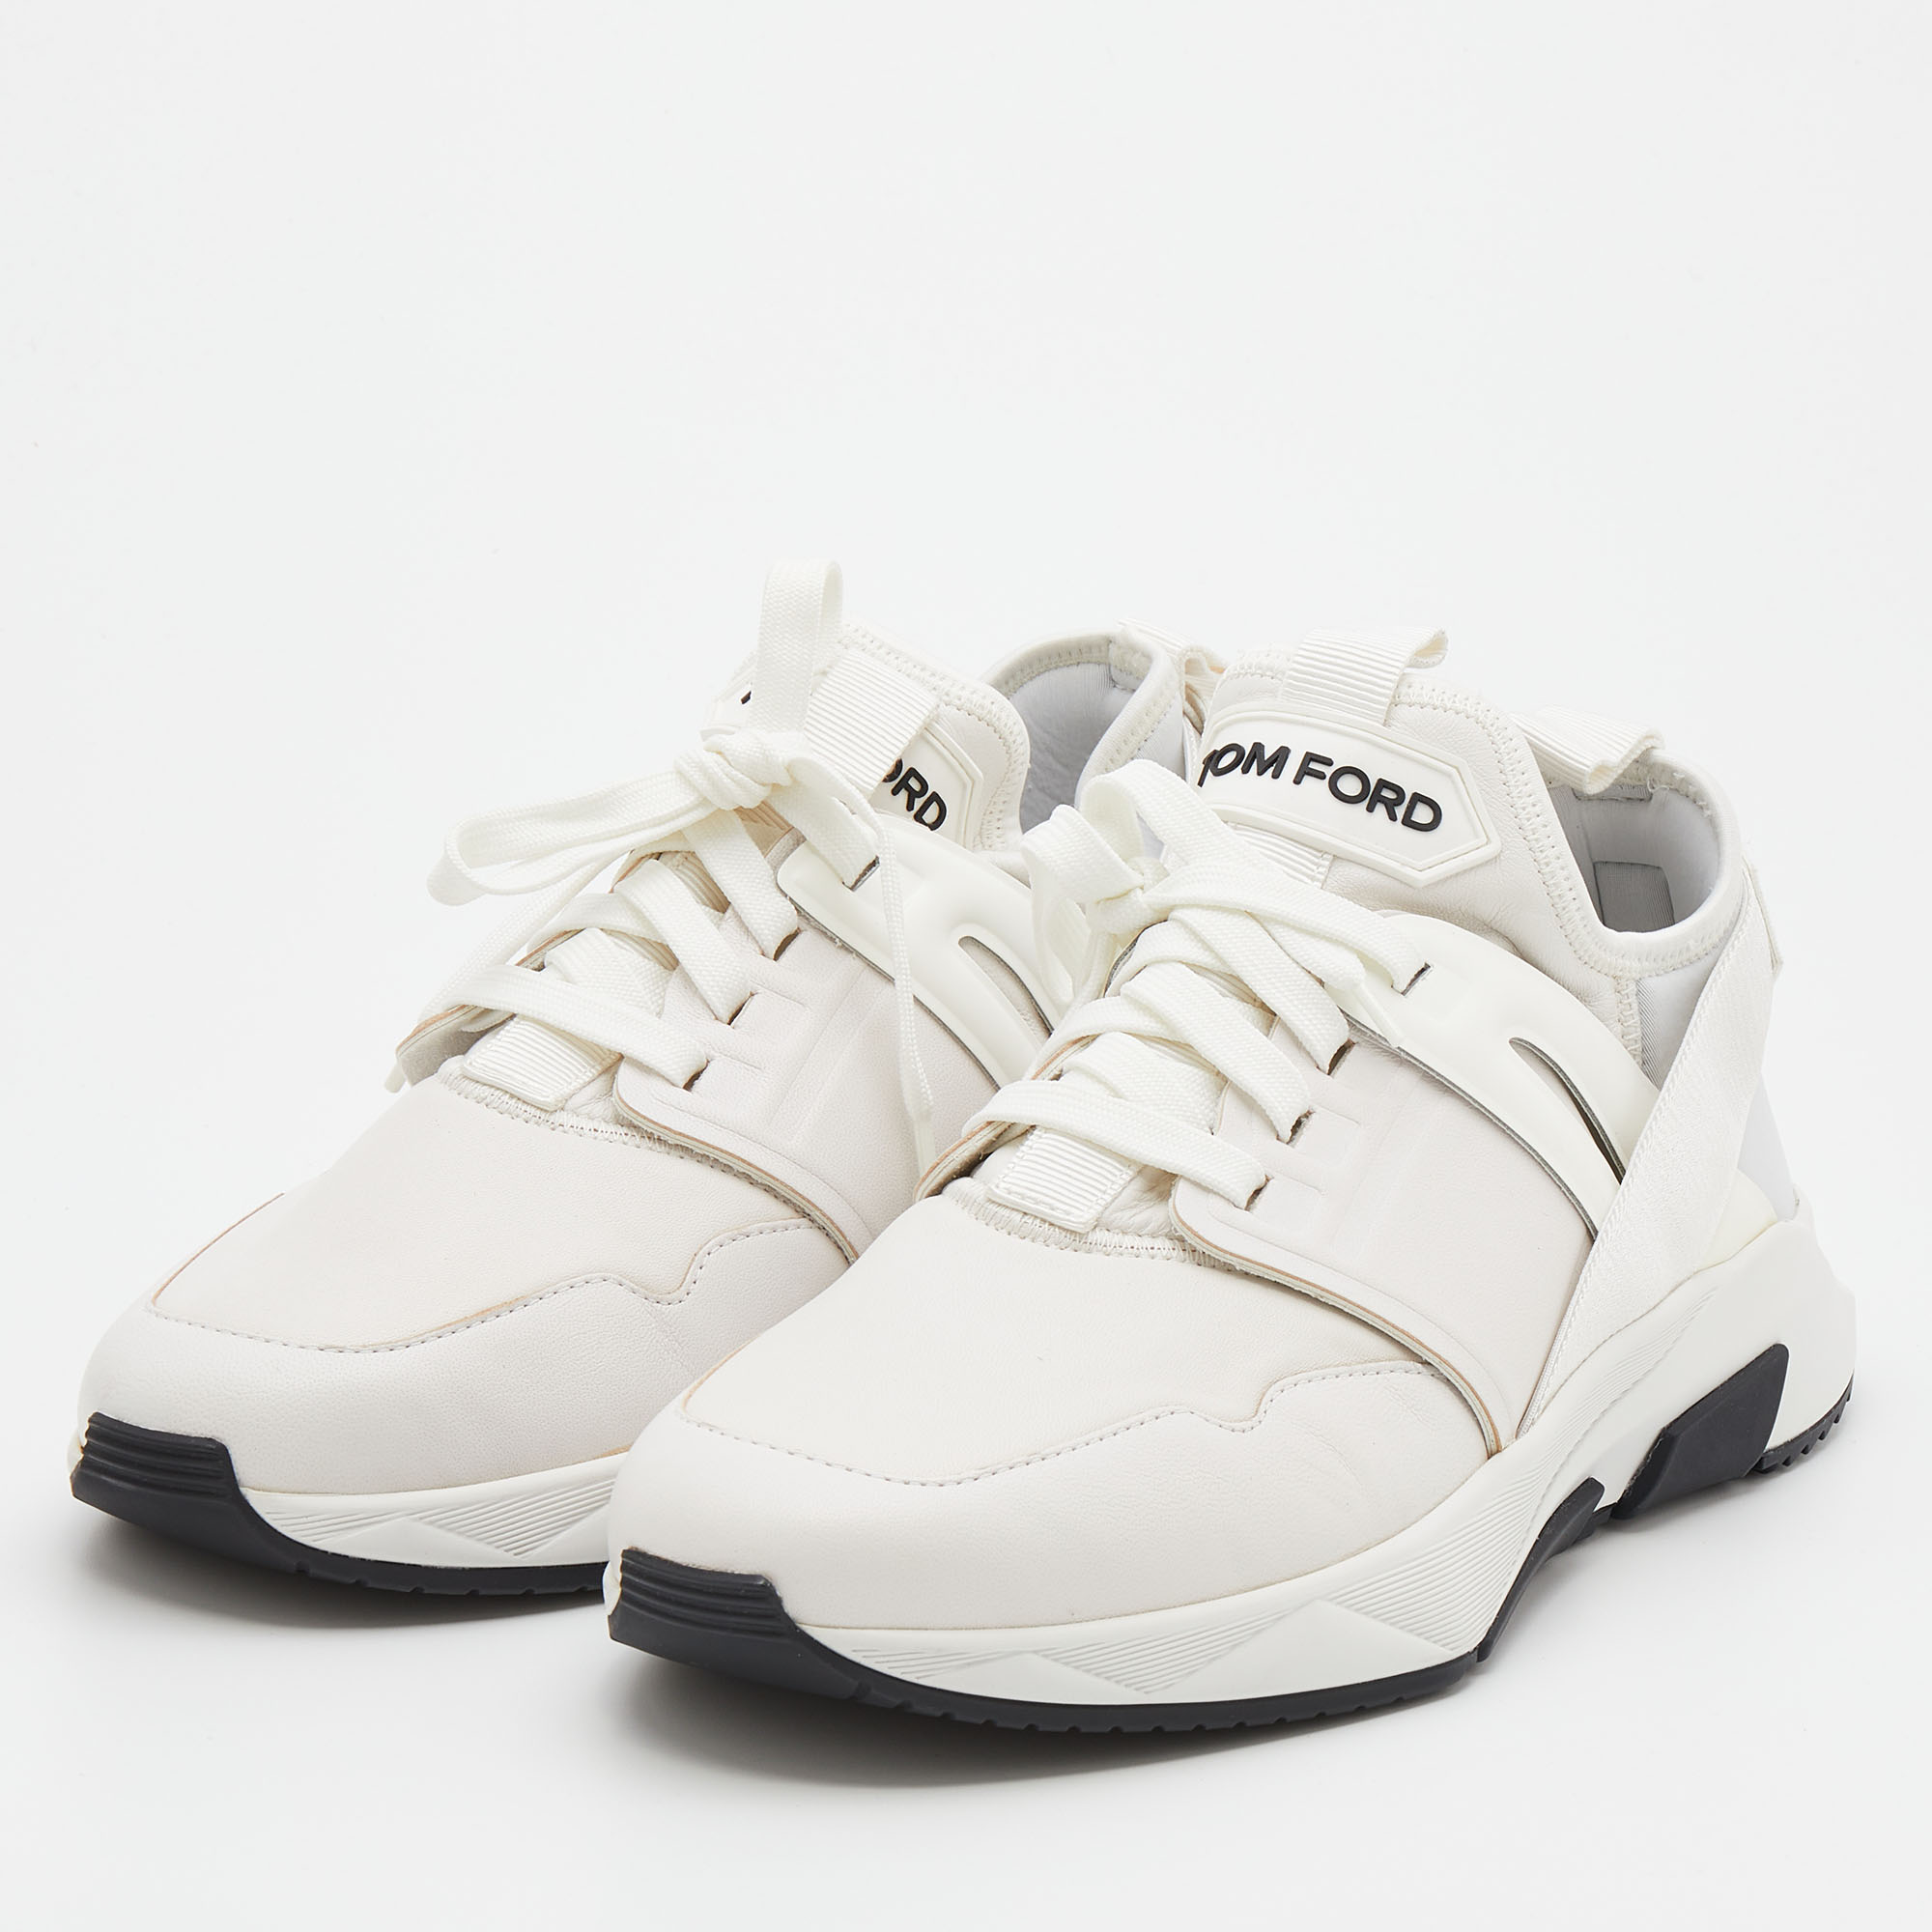 

Tom Ford White Leather and Neoprene Jago Sneakers Size